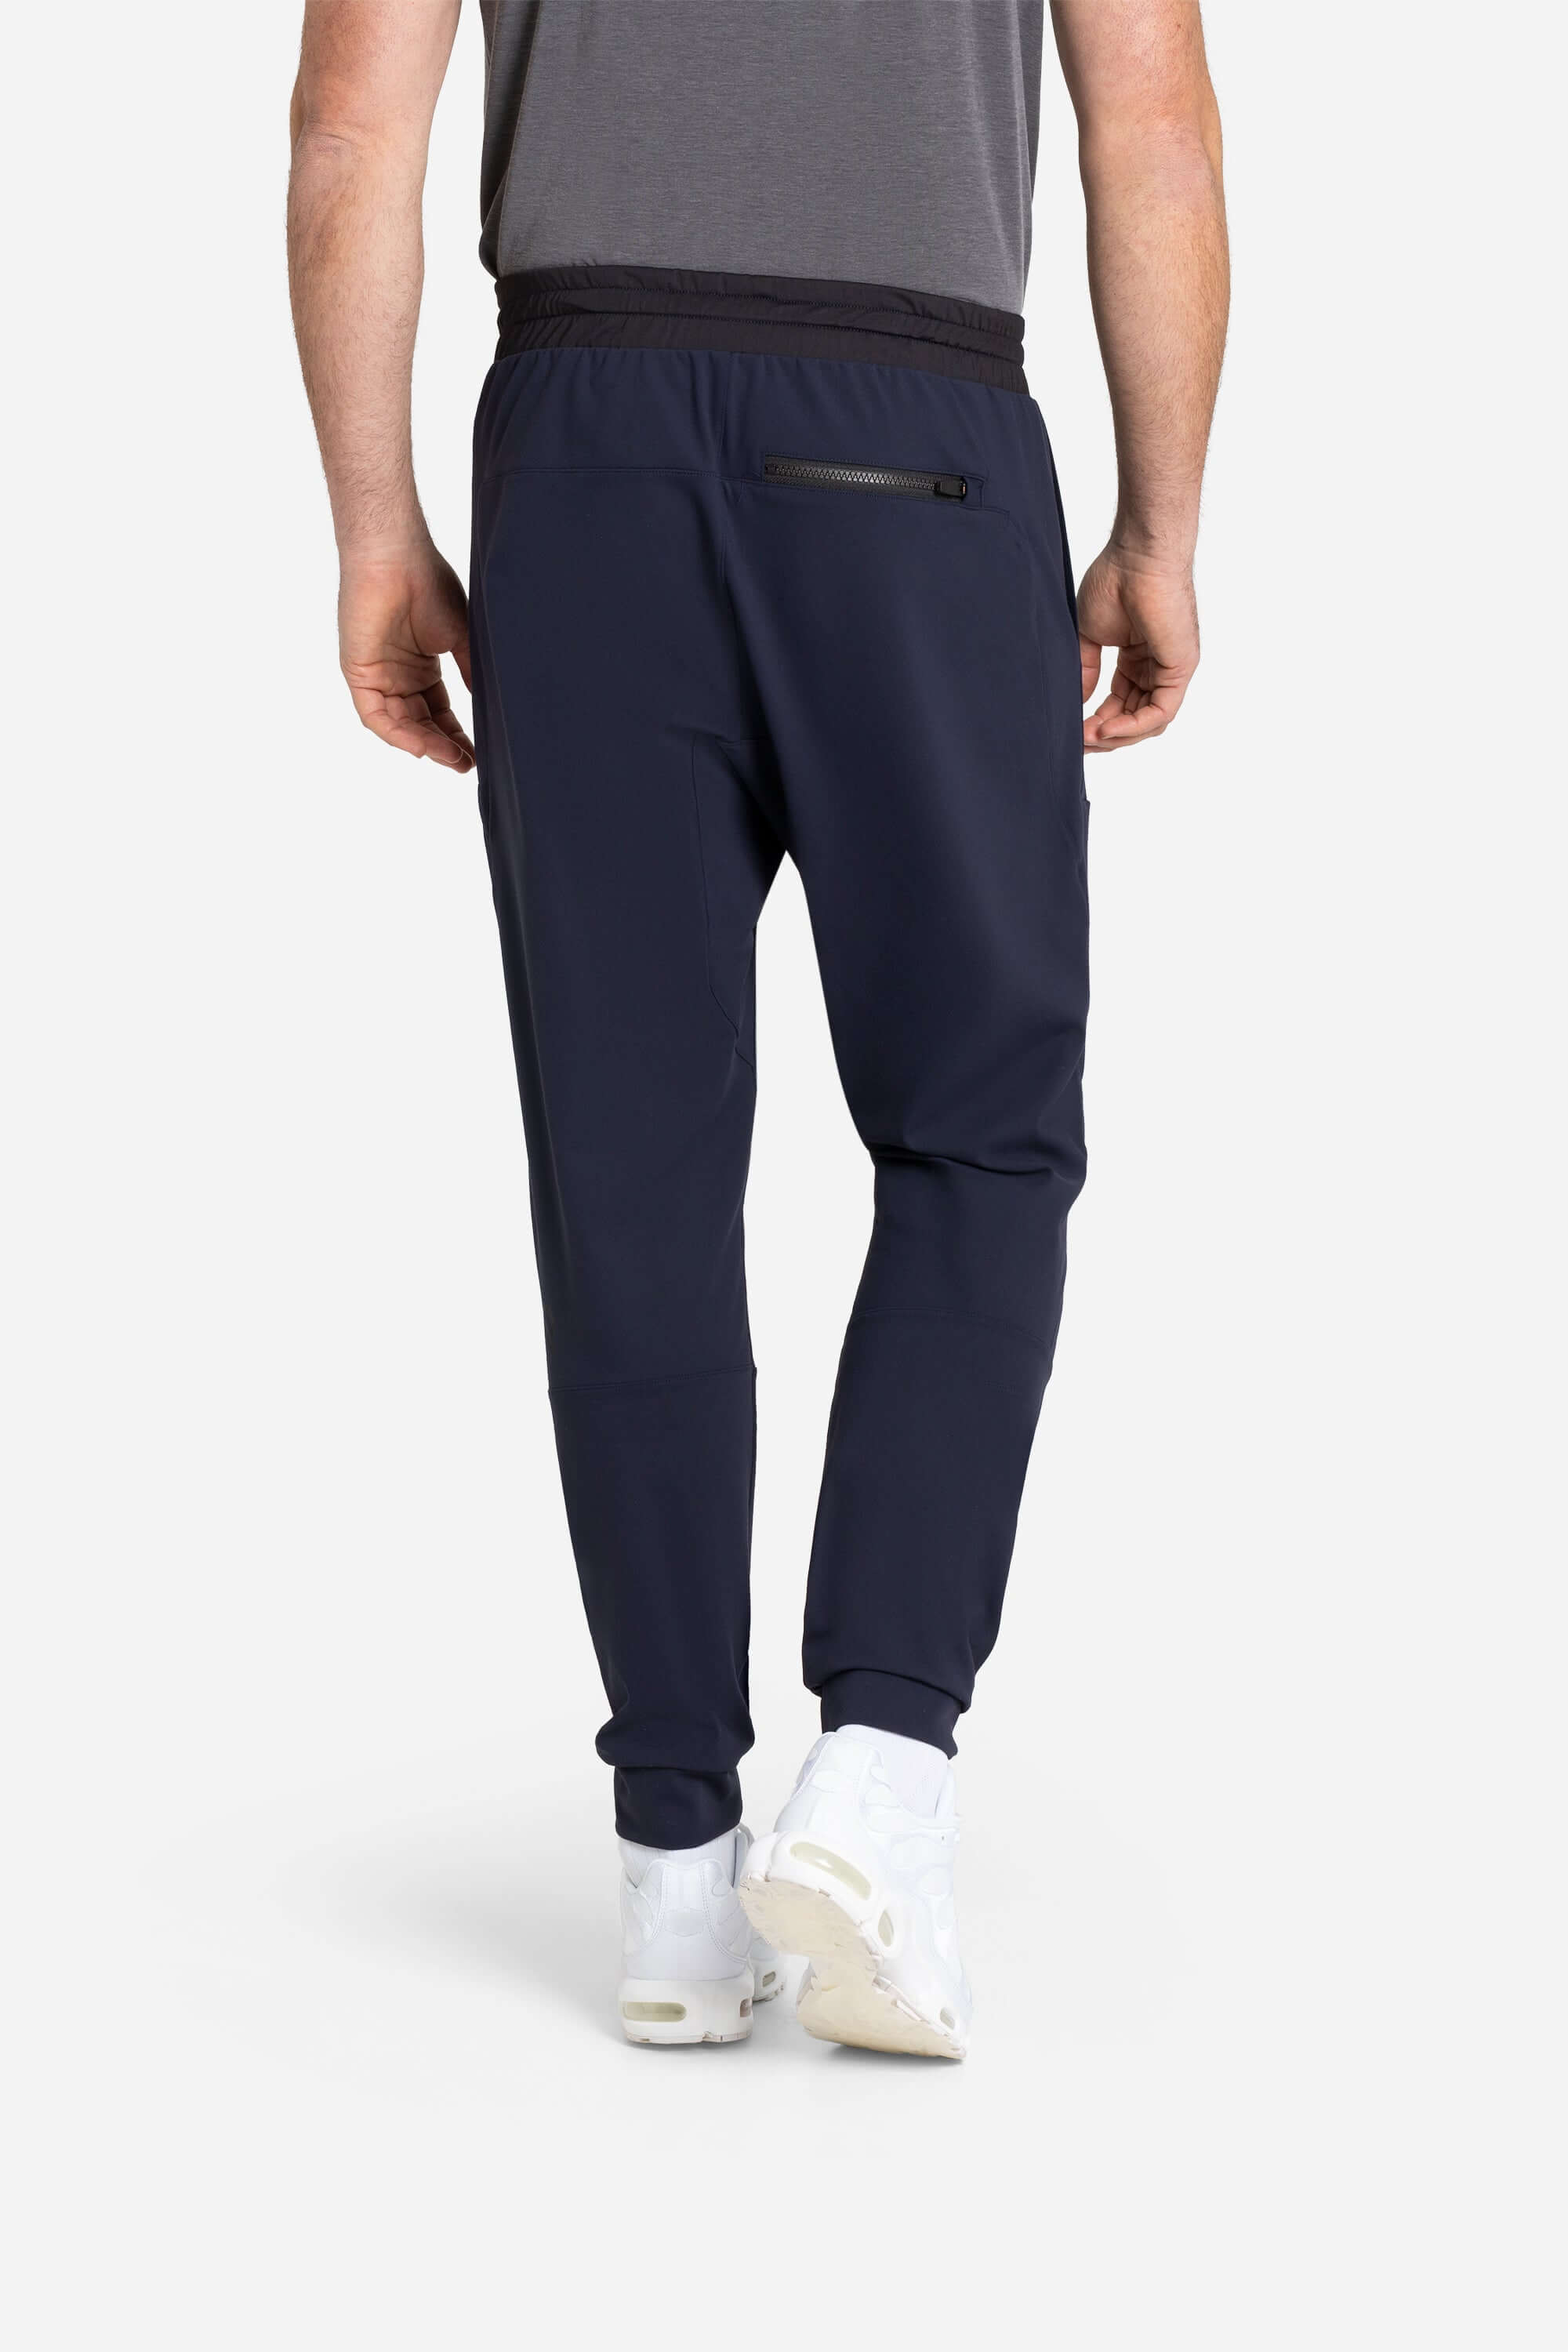 Arexx Jogger